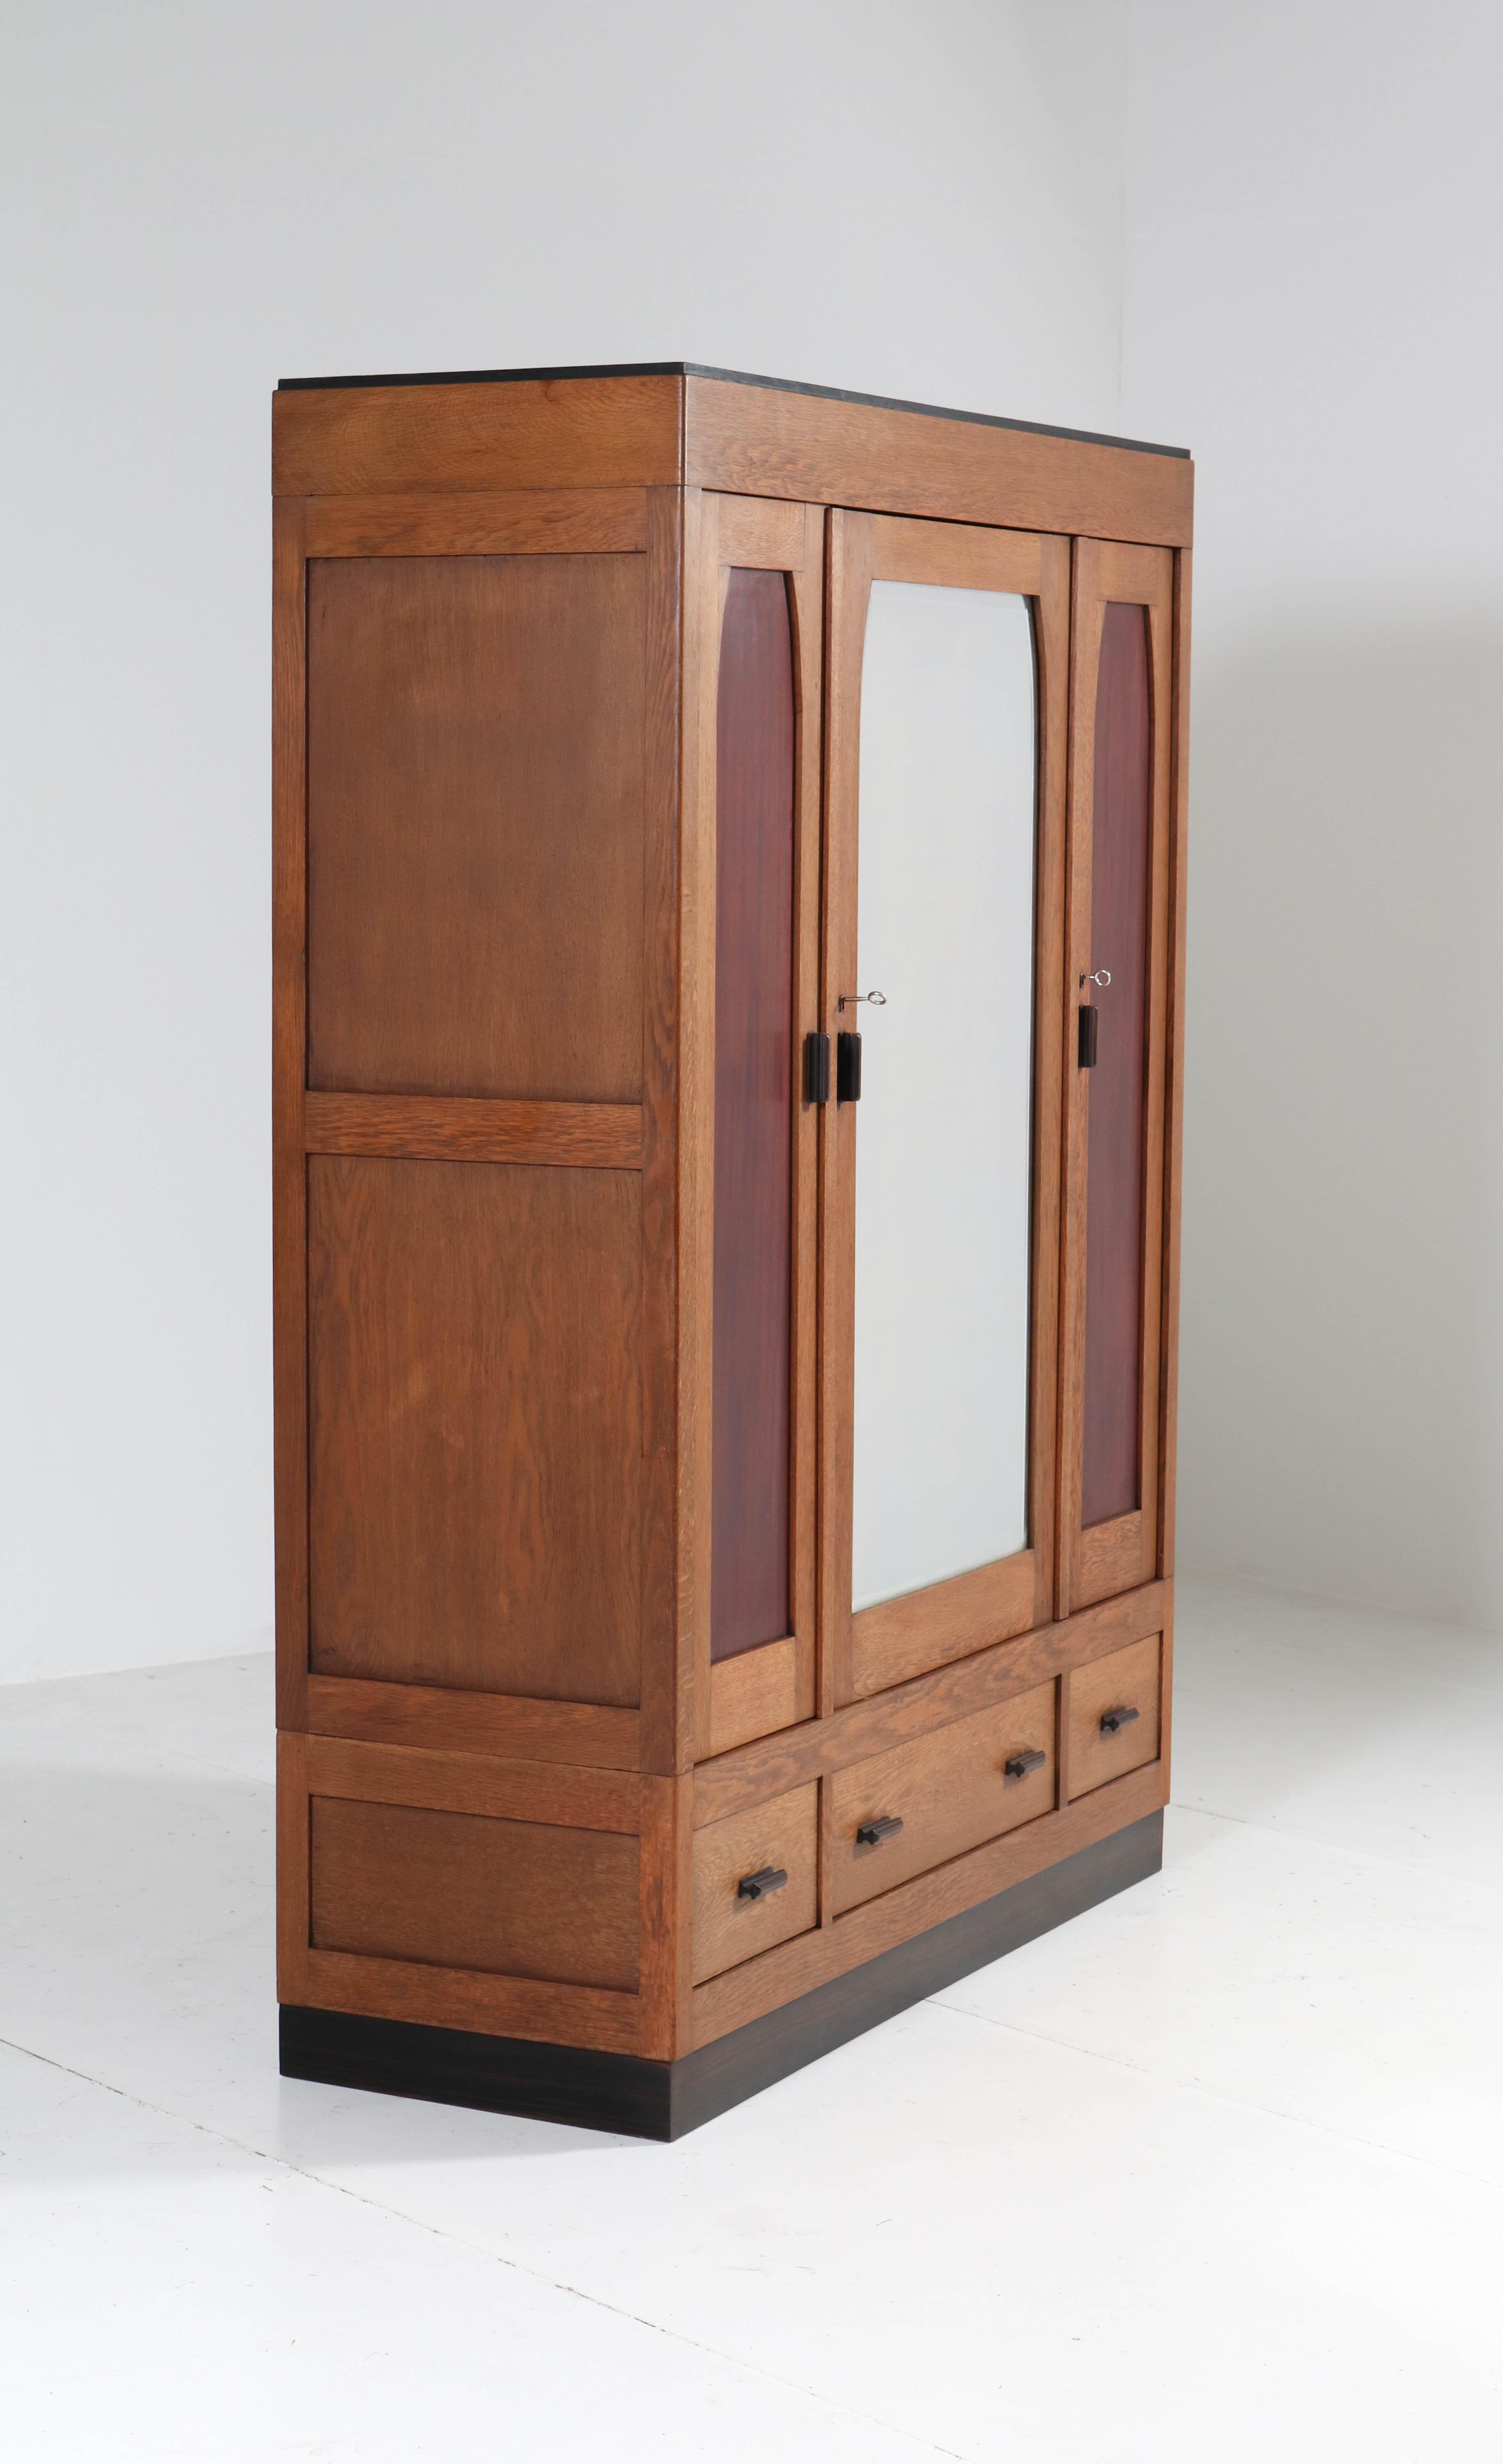 Wonderful and rare Art Deco Haagse School armoire or wardrobe.
Striking Dutch design from the 1920s.
Oak with original solid ebony Macassar handles on doors and drawers.
The two smaller doors have original mahogany panels.
Three original oak